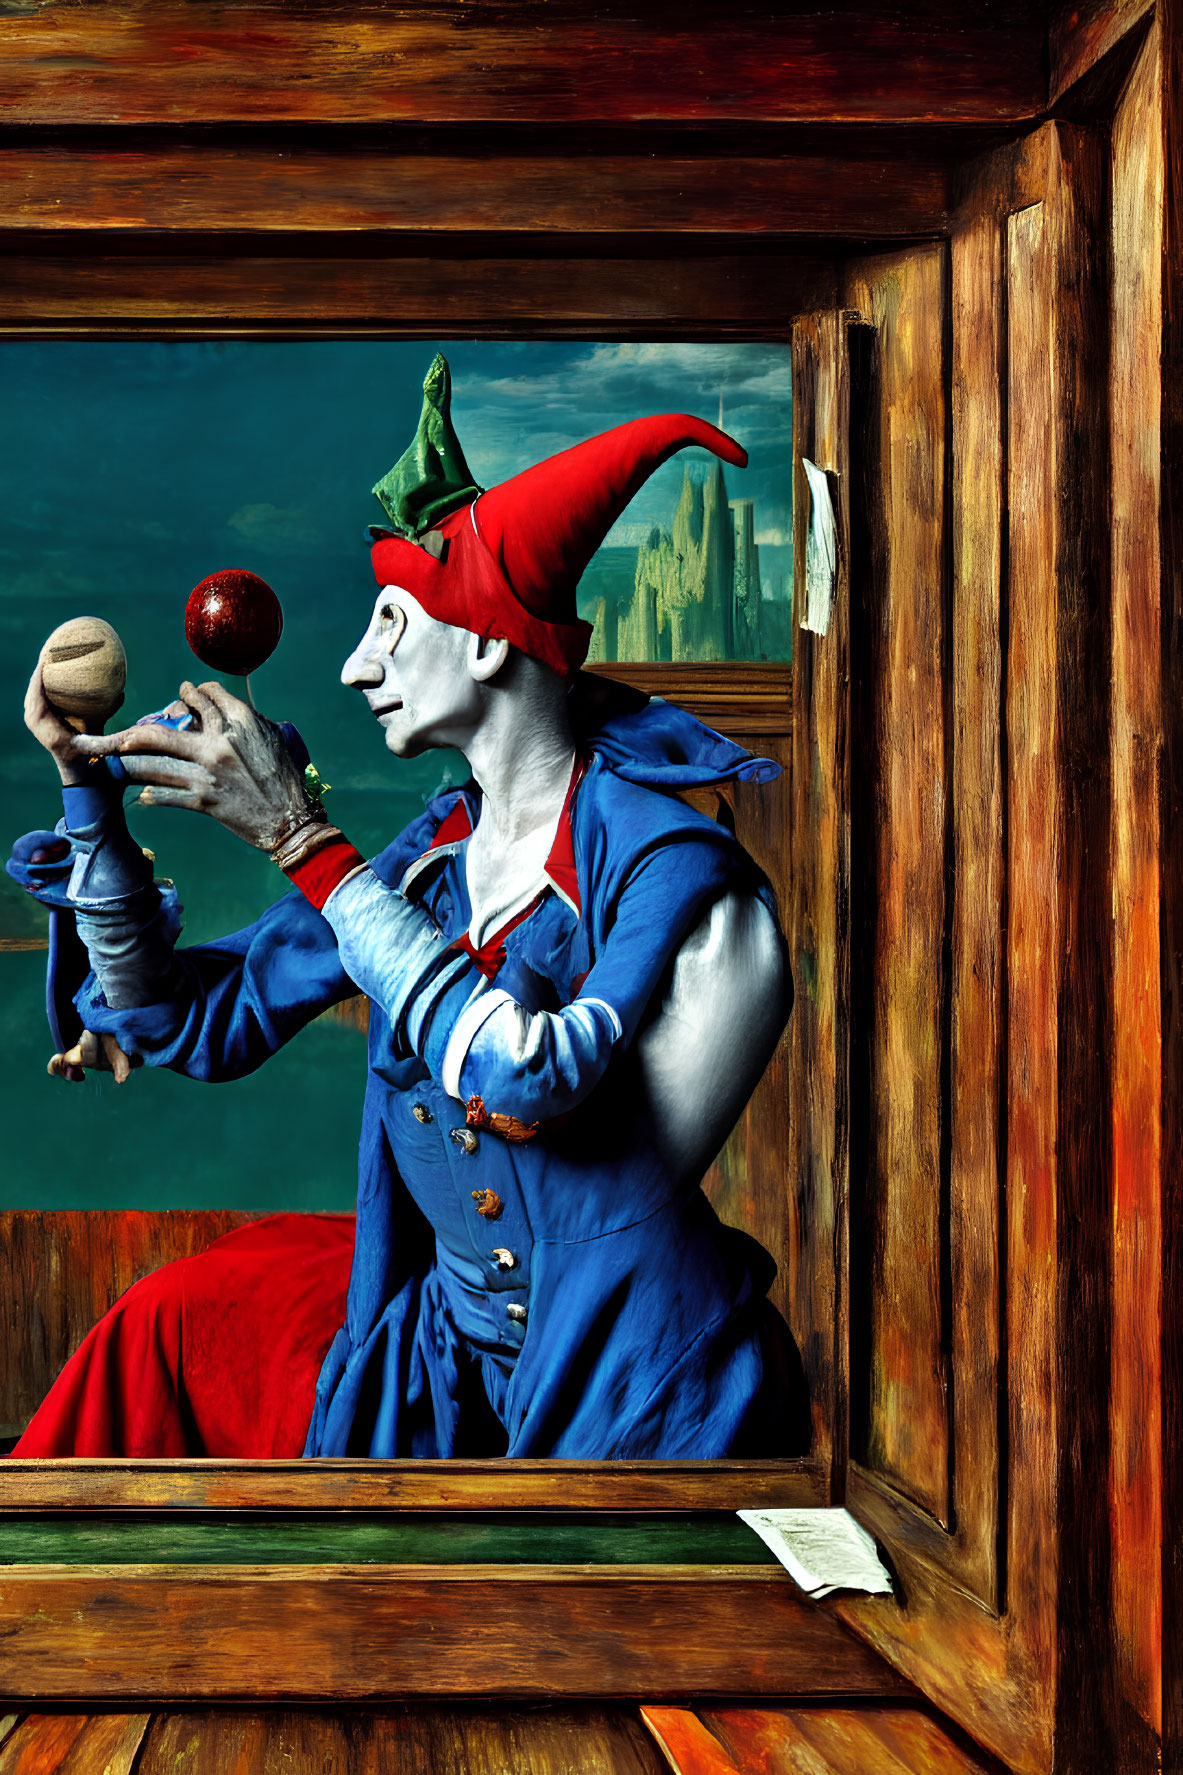 Colorful jester with marotte and red ball against cityscape view